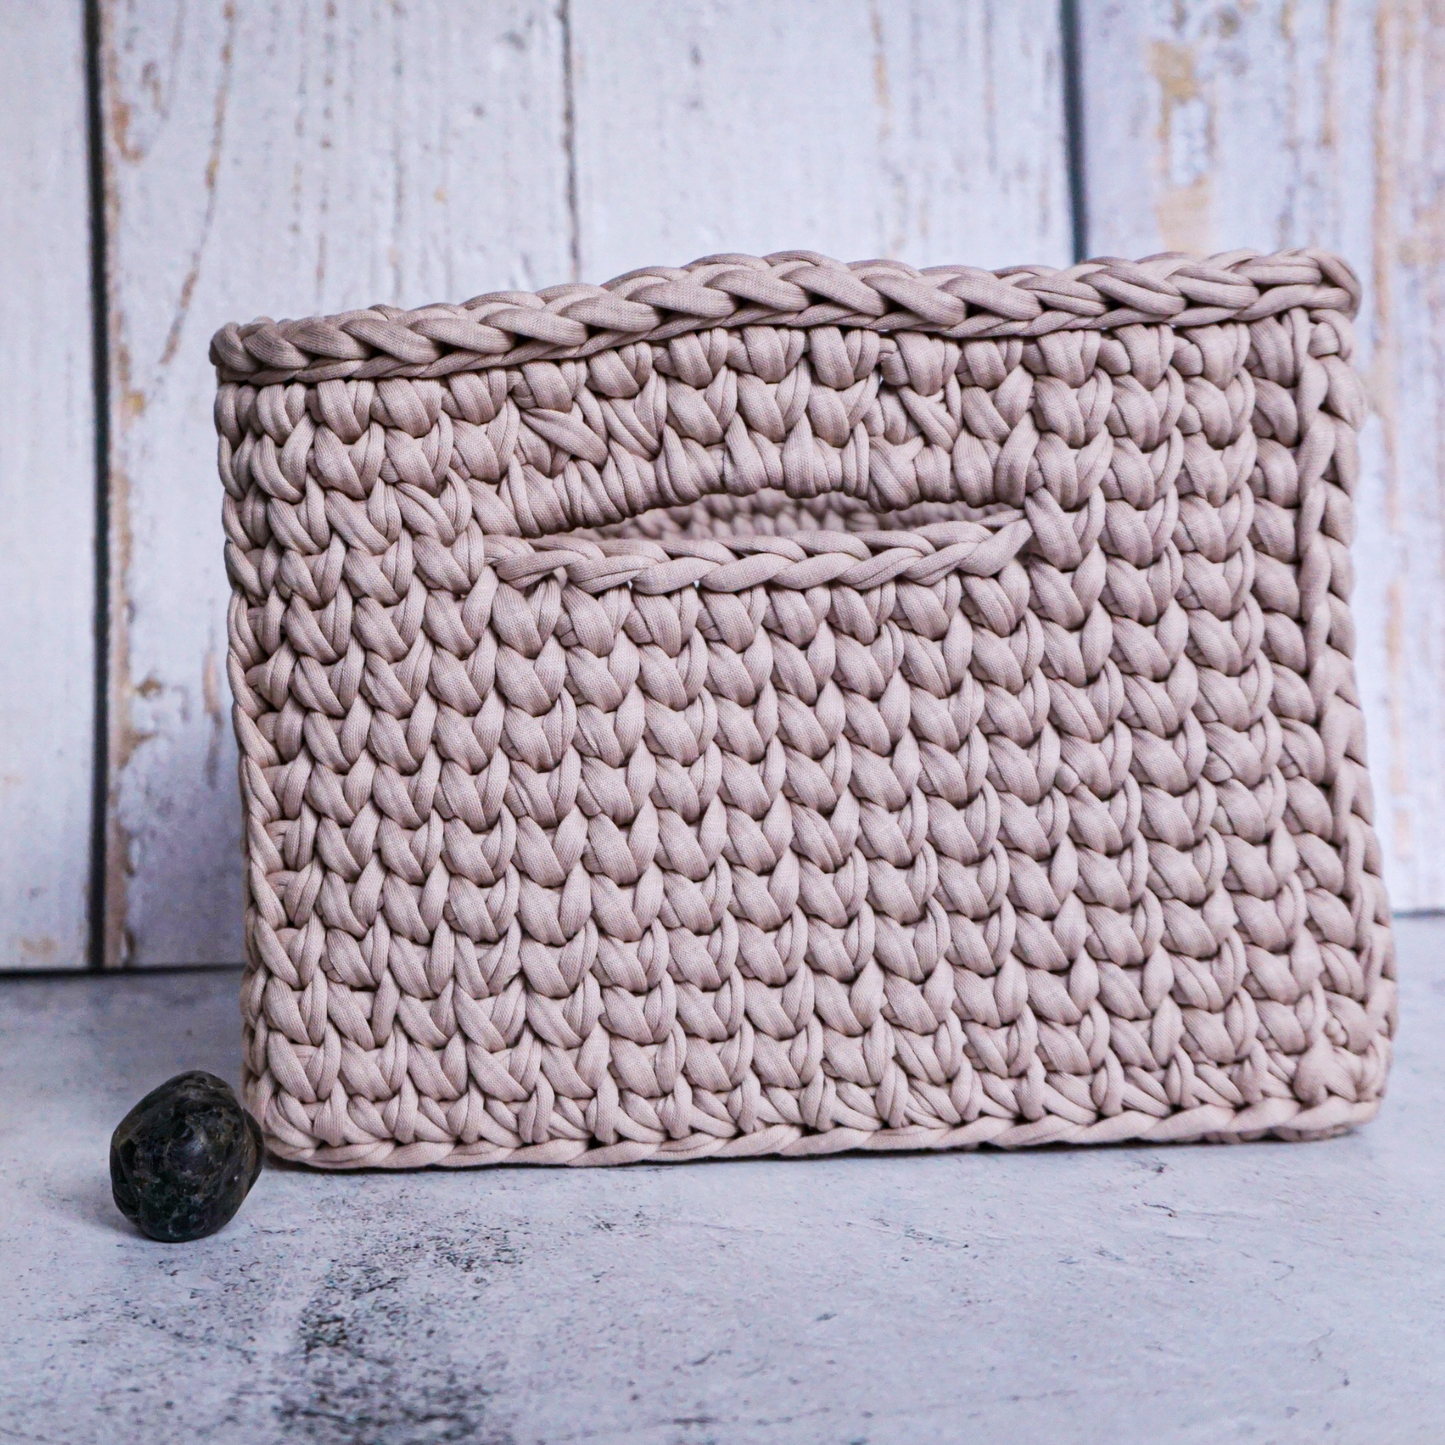 DIY Crochet Square Basket Kit with wooden base and handles